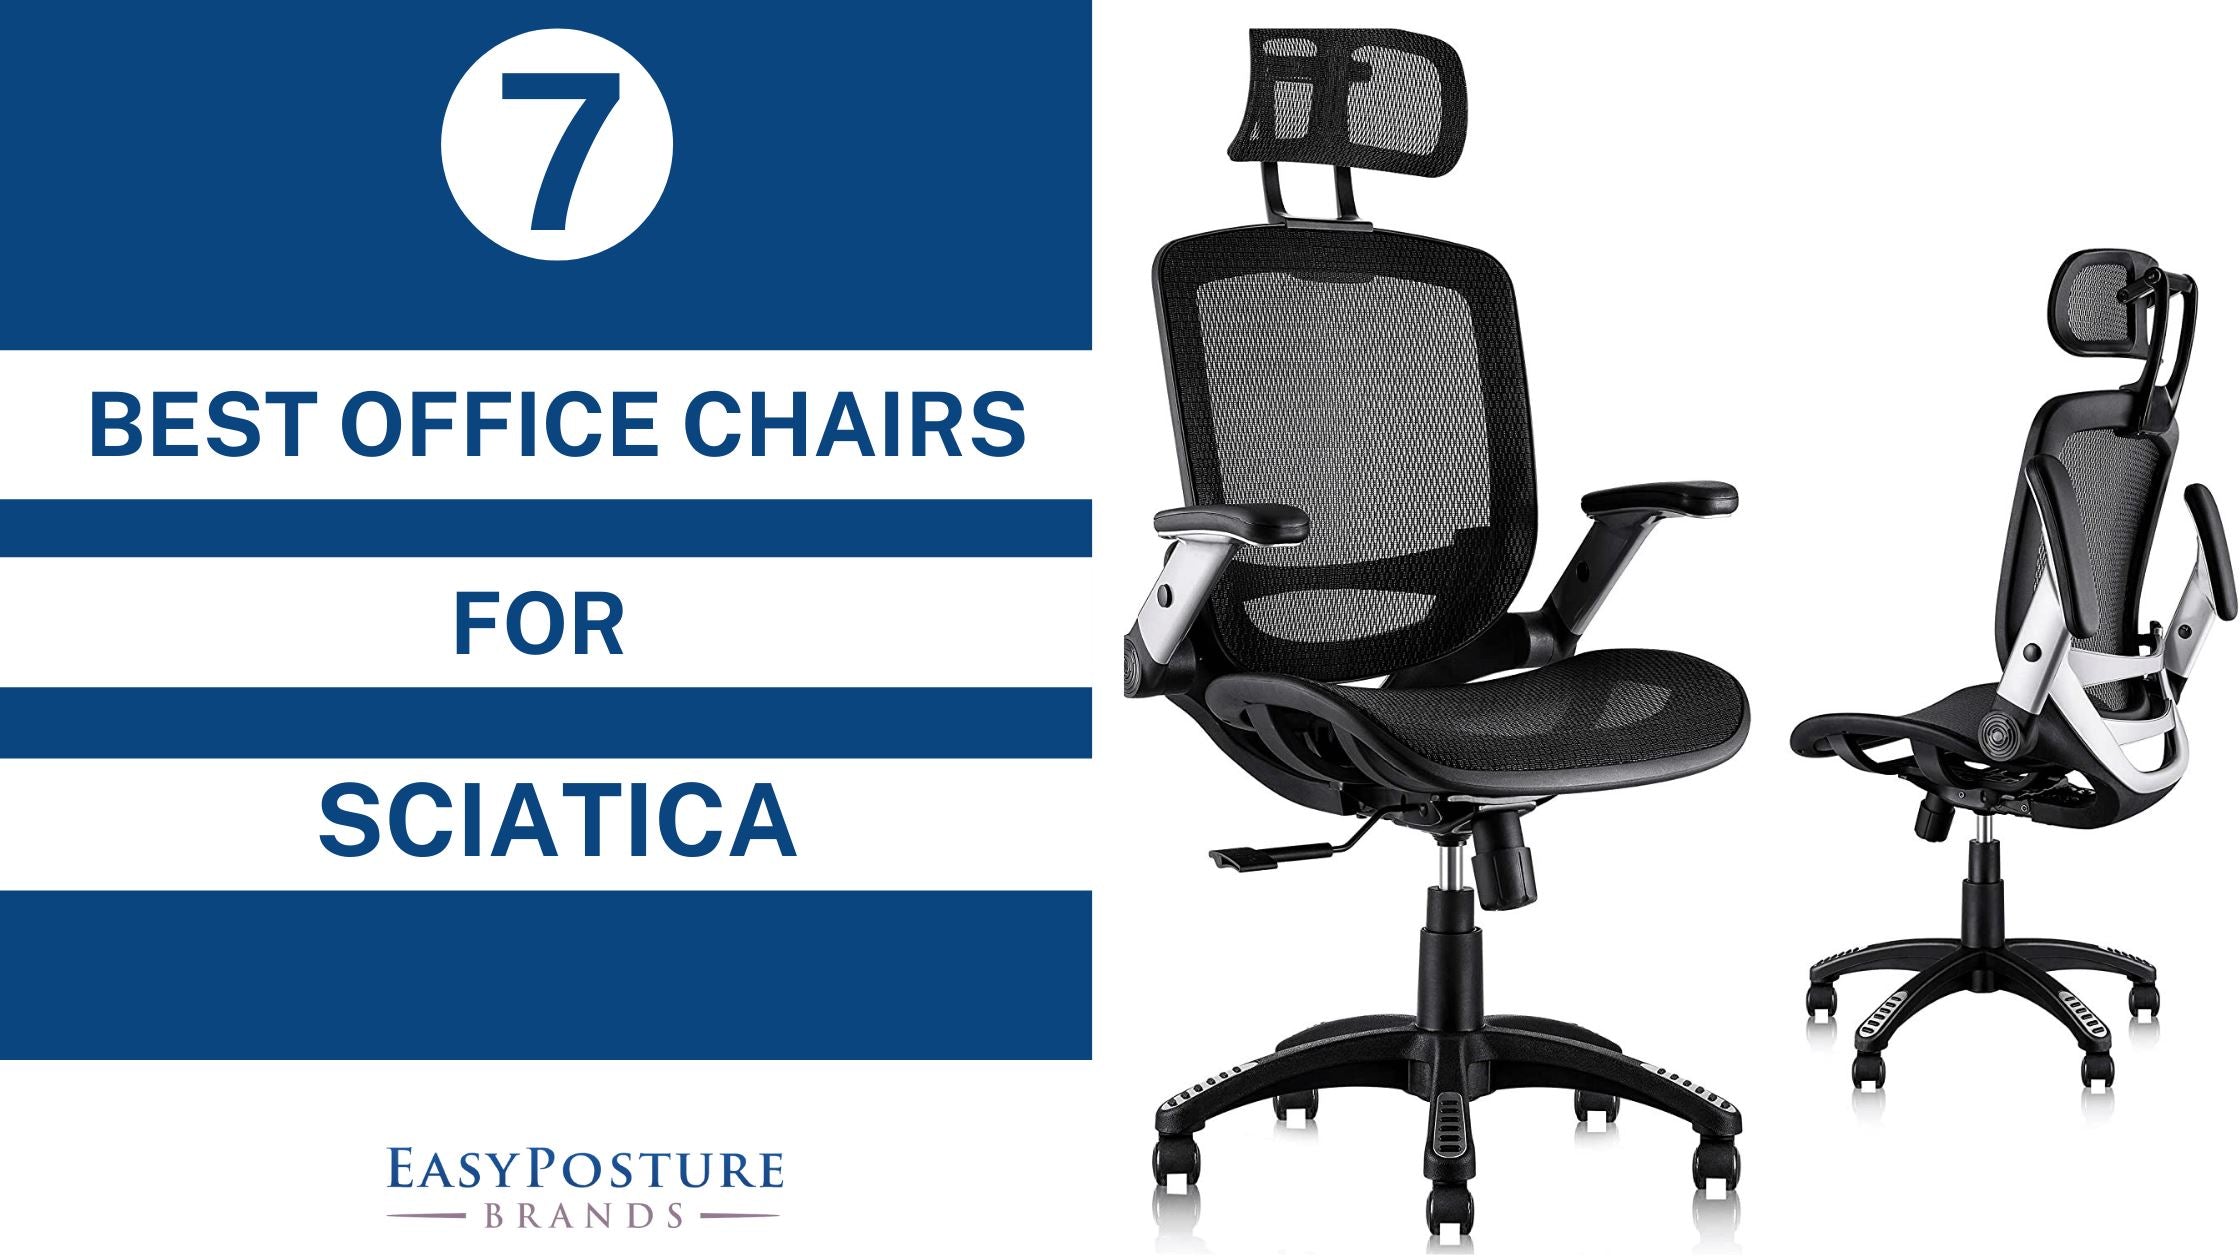 7 Best Office Chairs for Sciatica - For Sitting Long Hours - Easy Posture  Brands